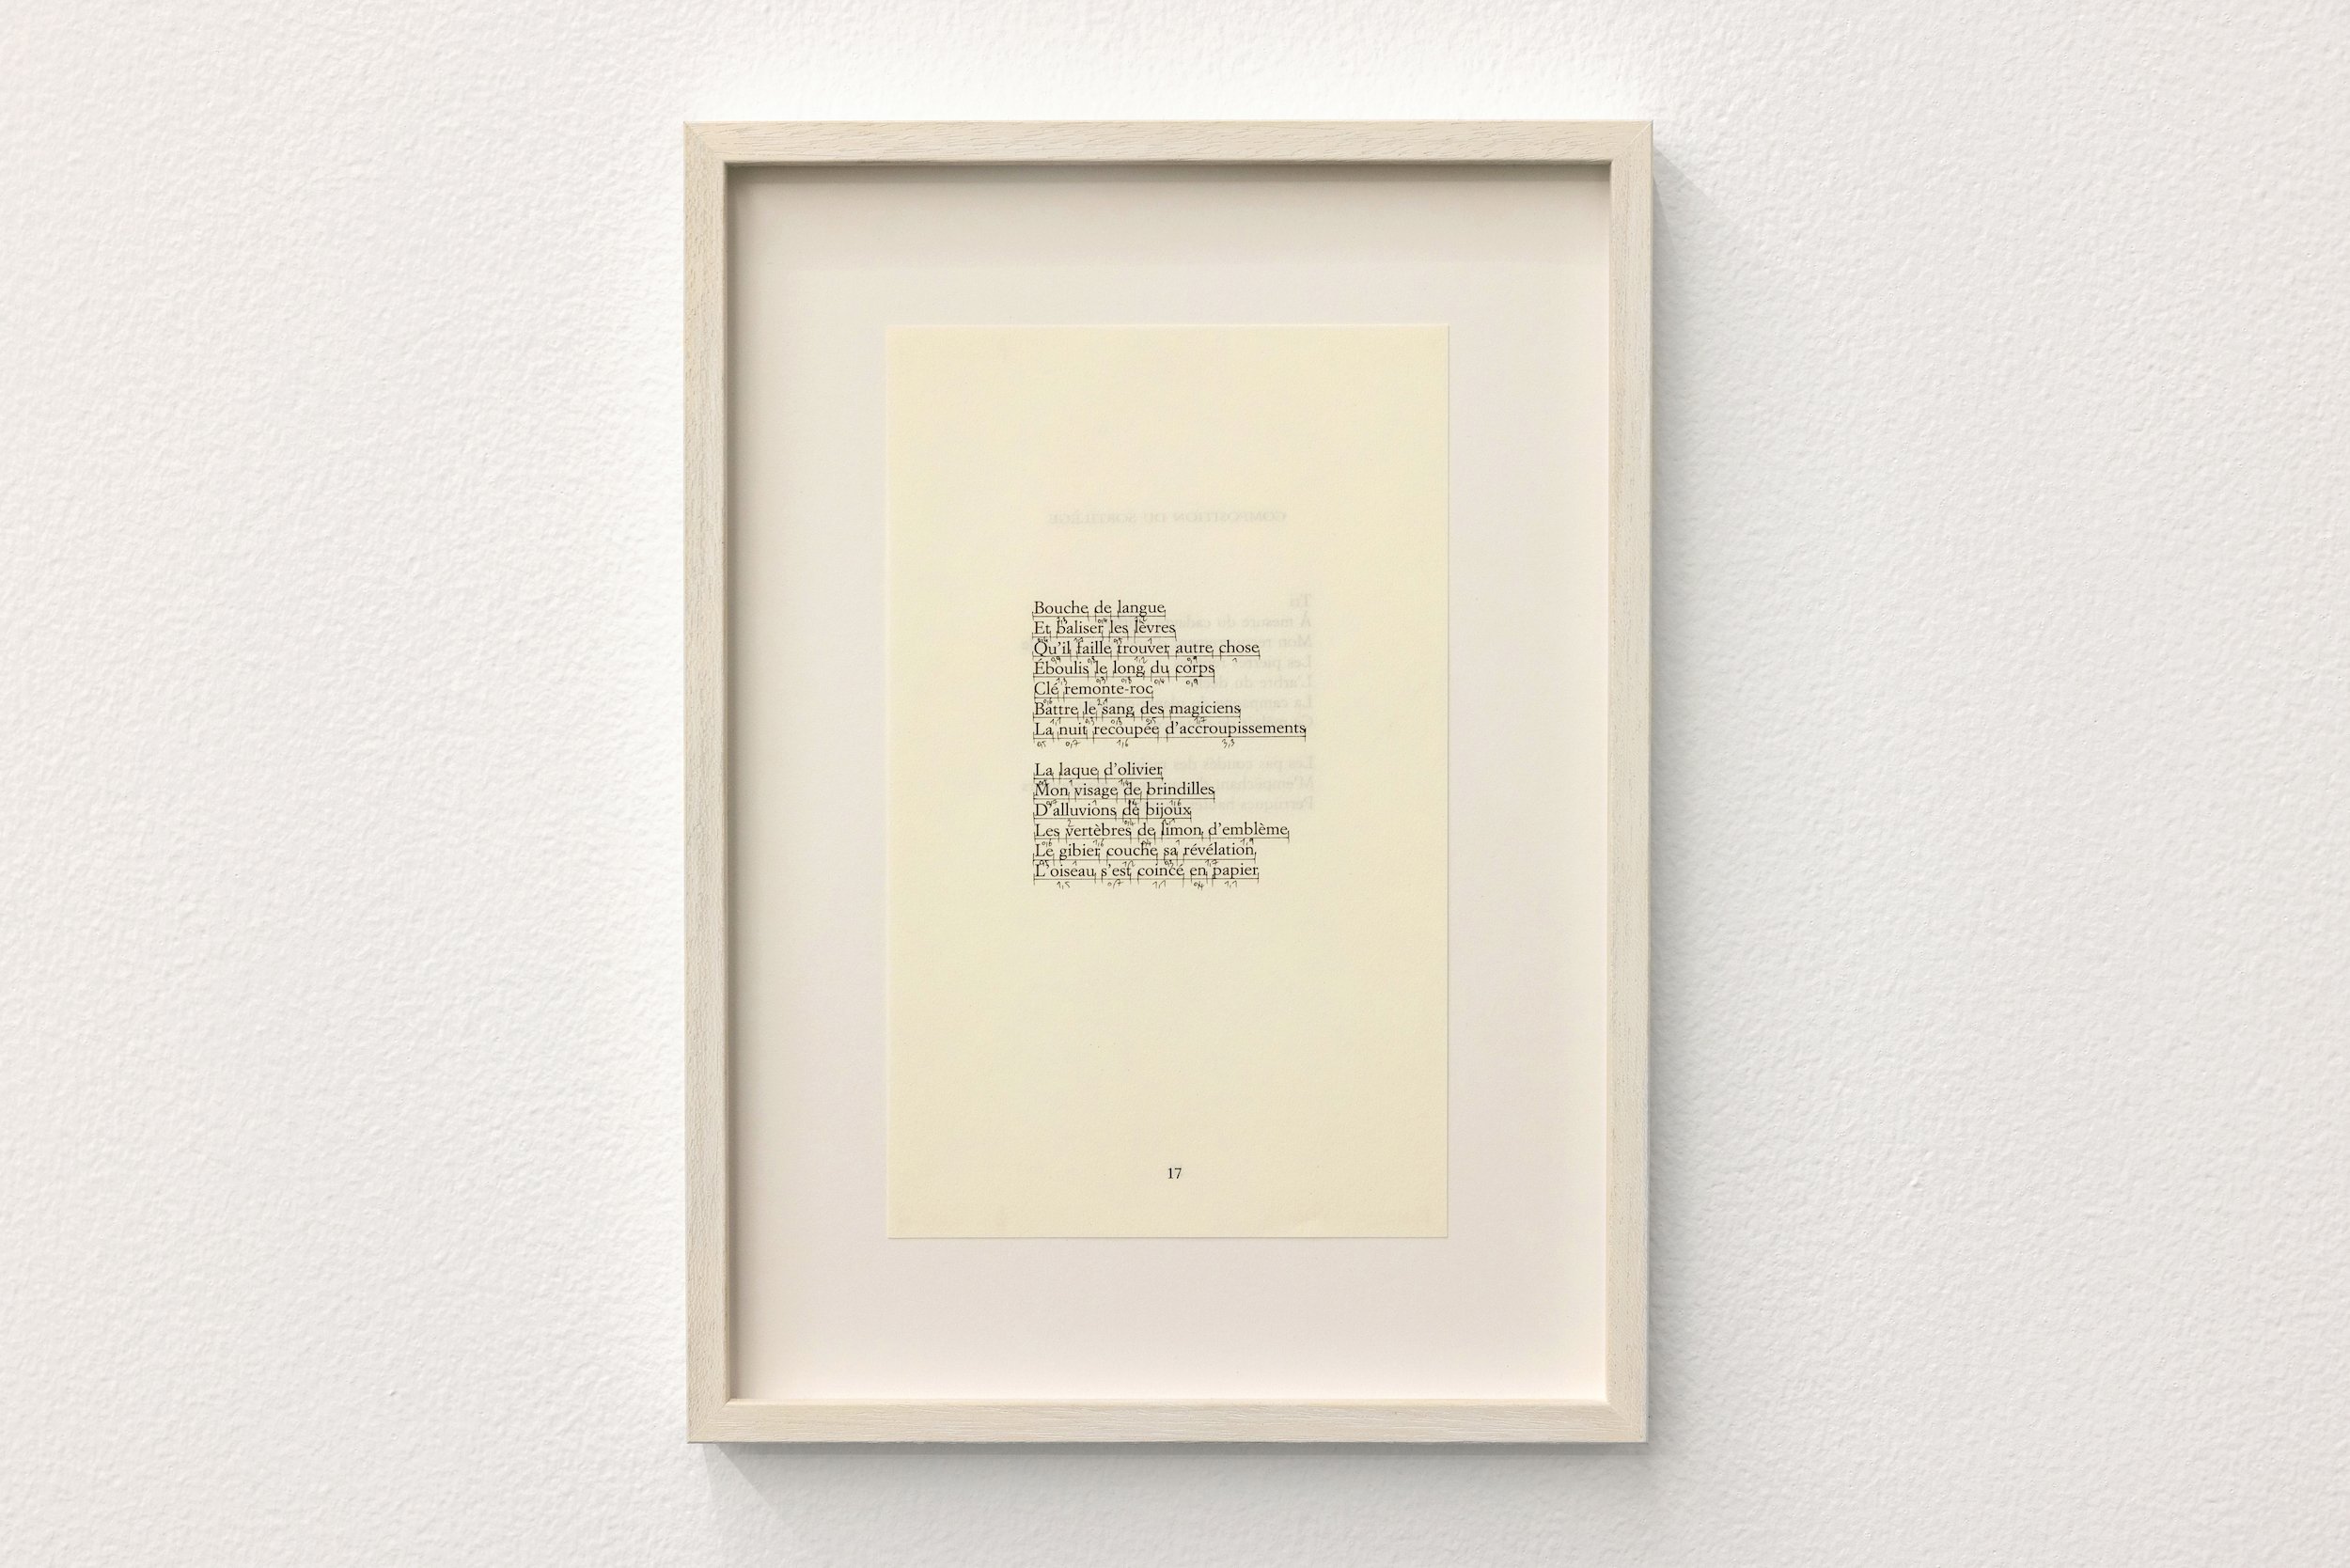  Word Count, 2022, book page, permanent marker, 23x14 cm / 31.5 x 23 cm (framed), unique variation   Each word of a poem by Michel Bulteau is measured in centimetres and its size noted underneath it. 